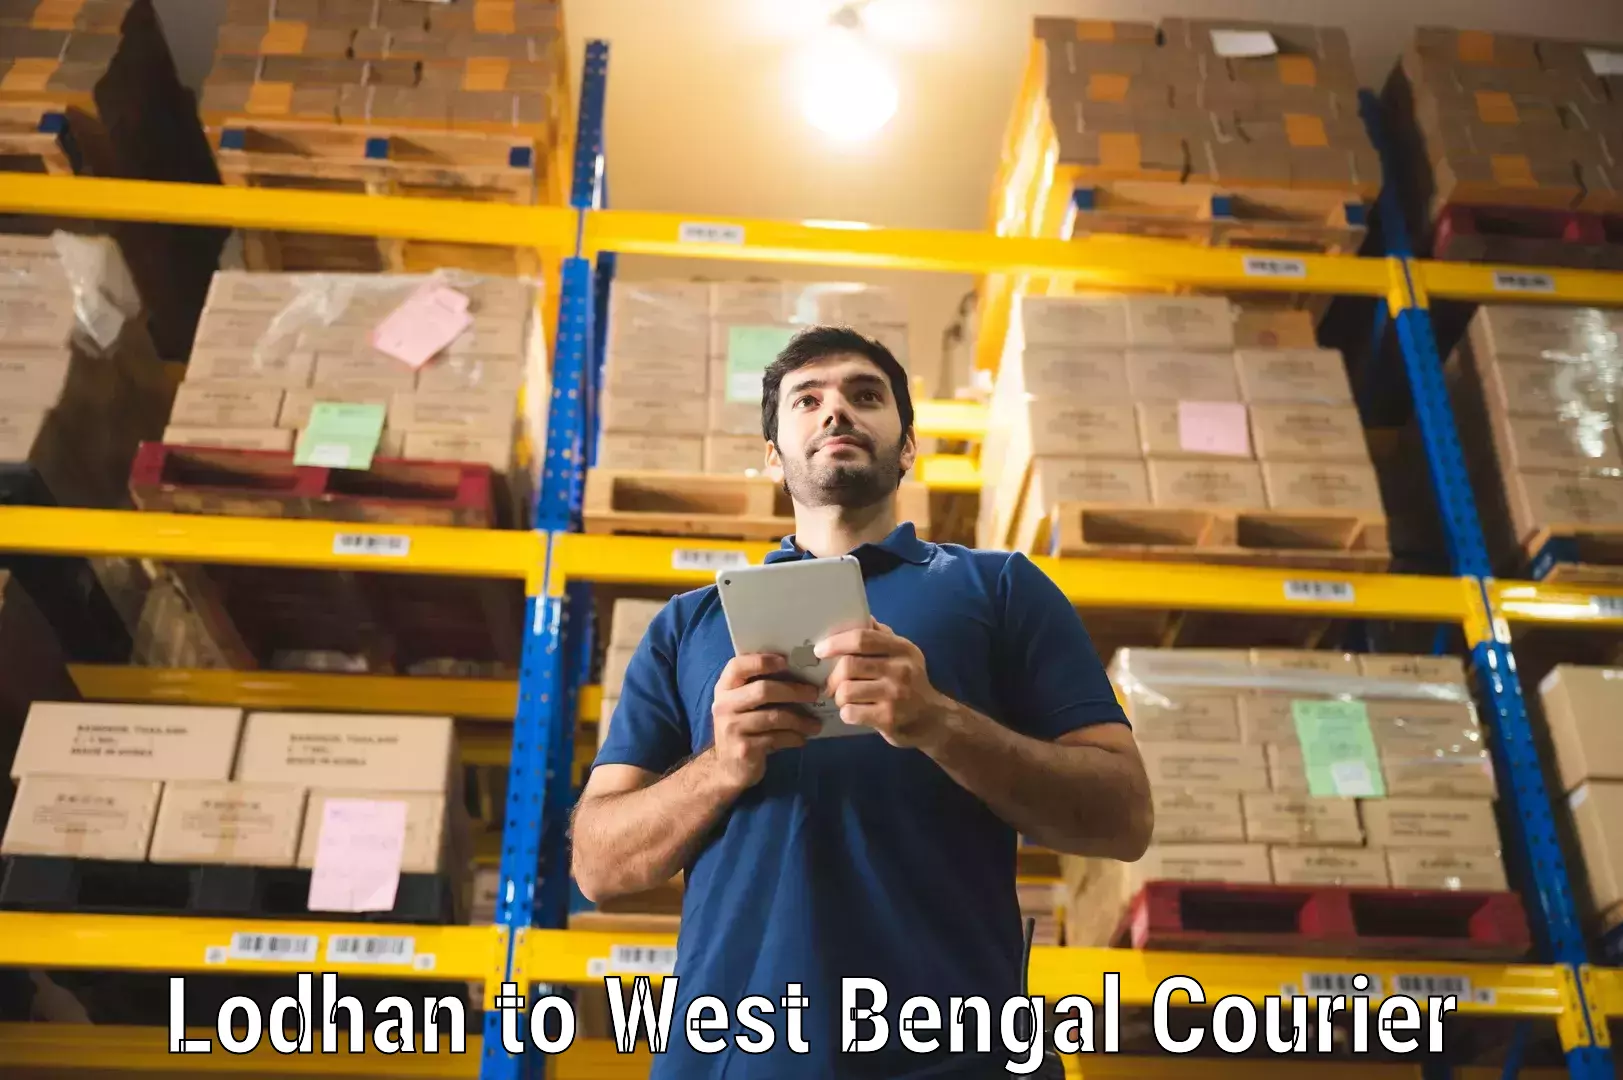 Advanced delivery network Lodhan to Lodhan